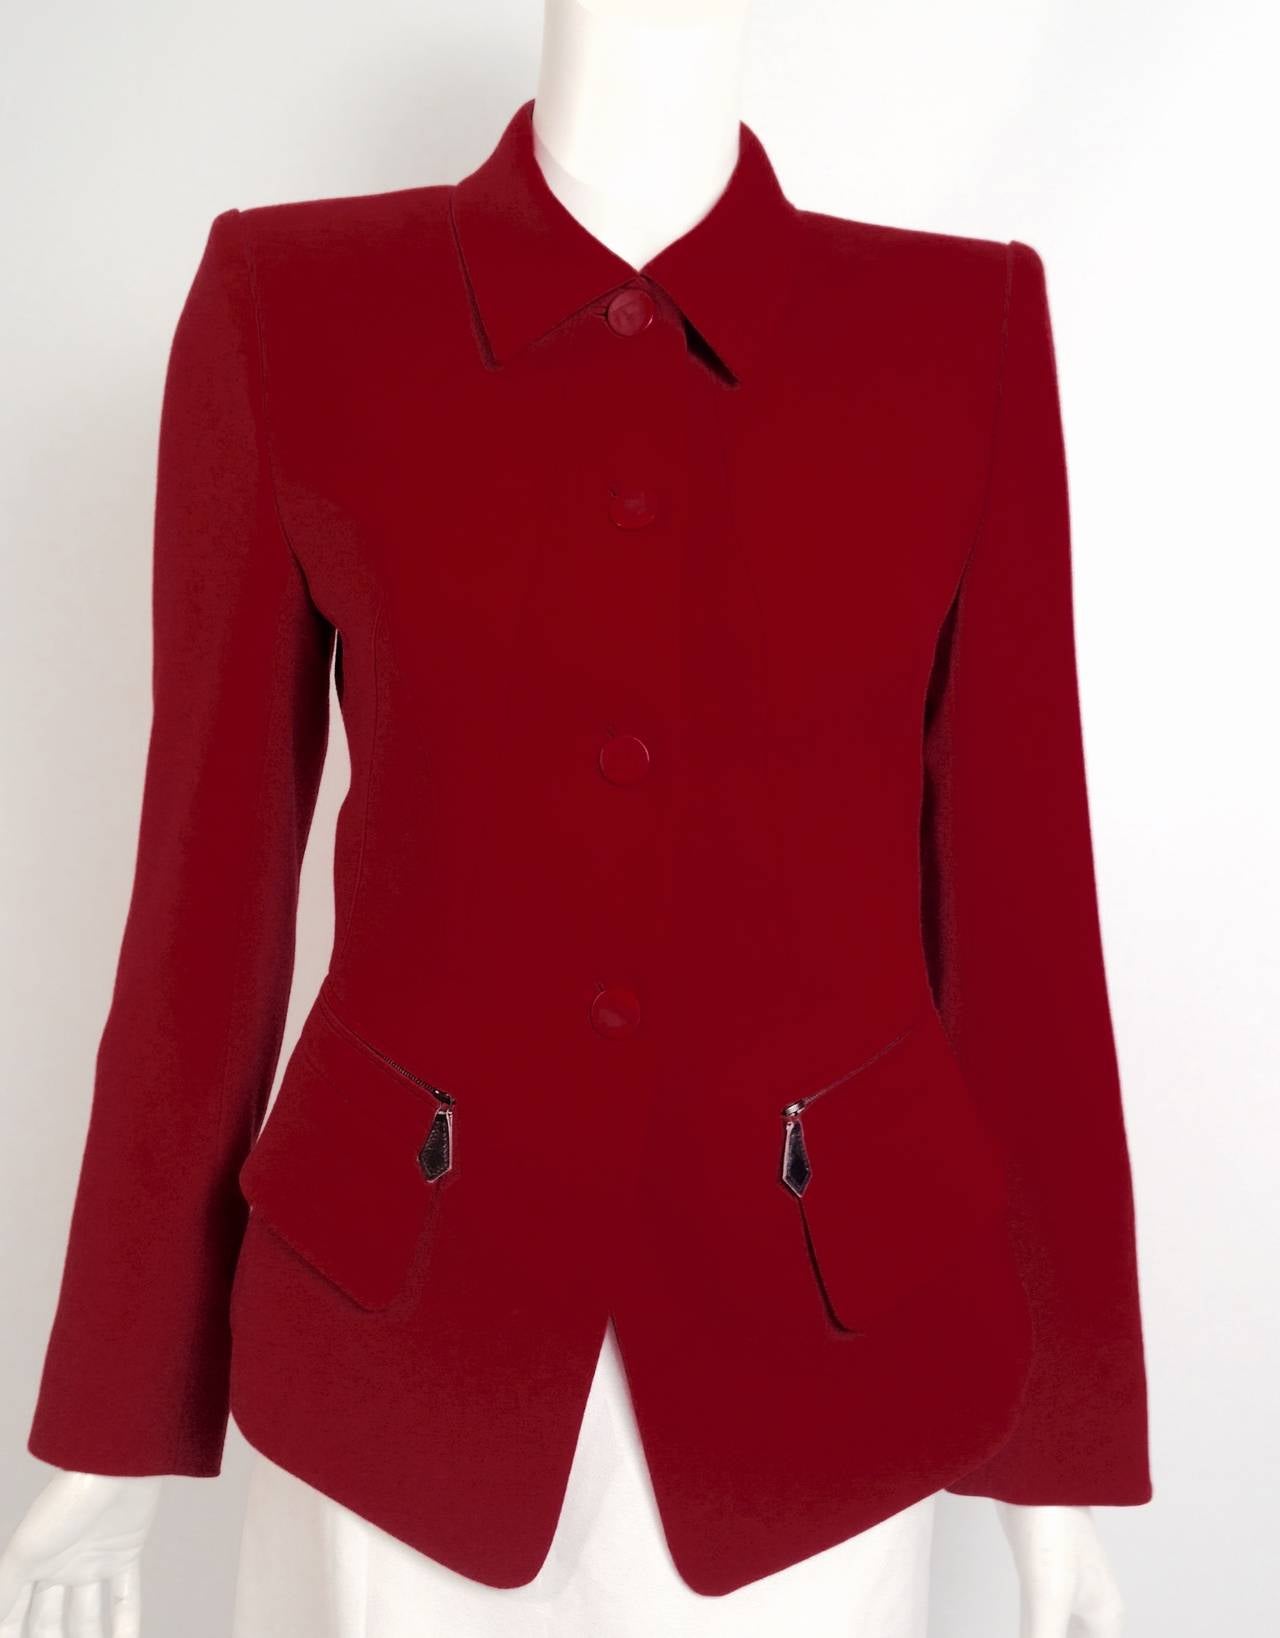 Handsome in Hermès!  Ravishing red fitted, cropped jacket is a testament to the heritage and tradition that is distinctly Hermès.  Features include luxurious claret wool fabric, two zippered pockets with leather pulls and two flap pockets. 